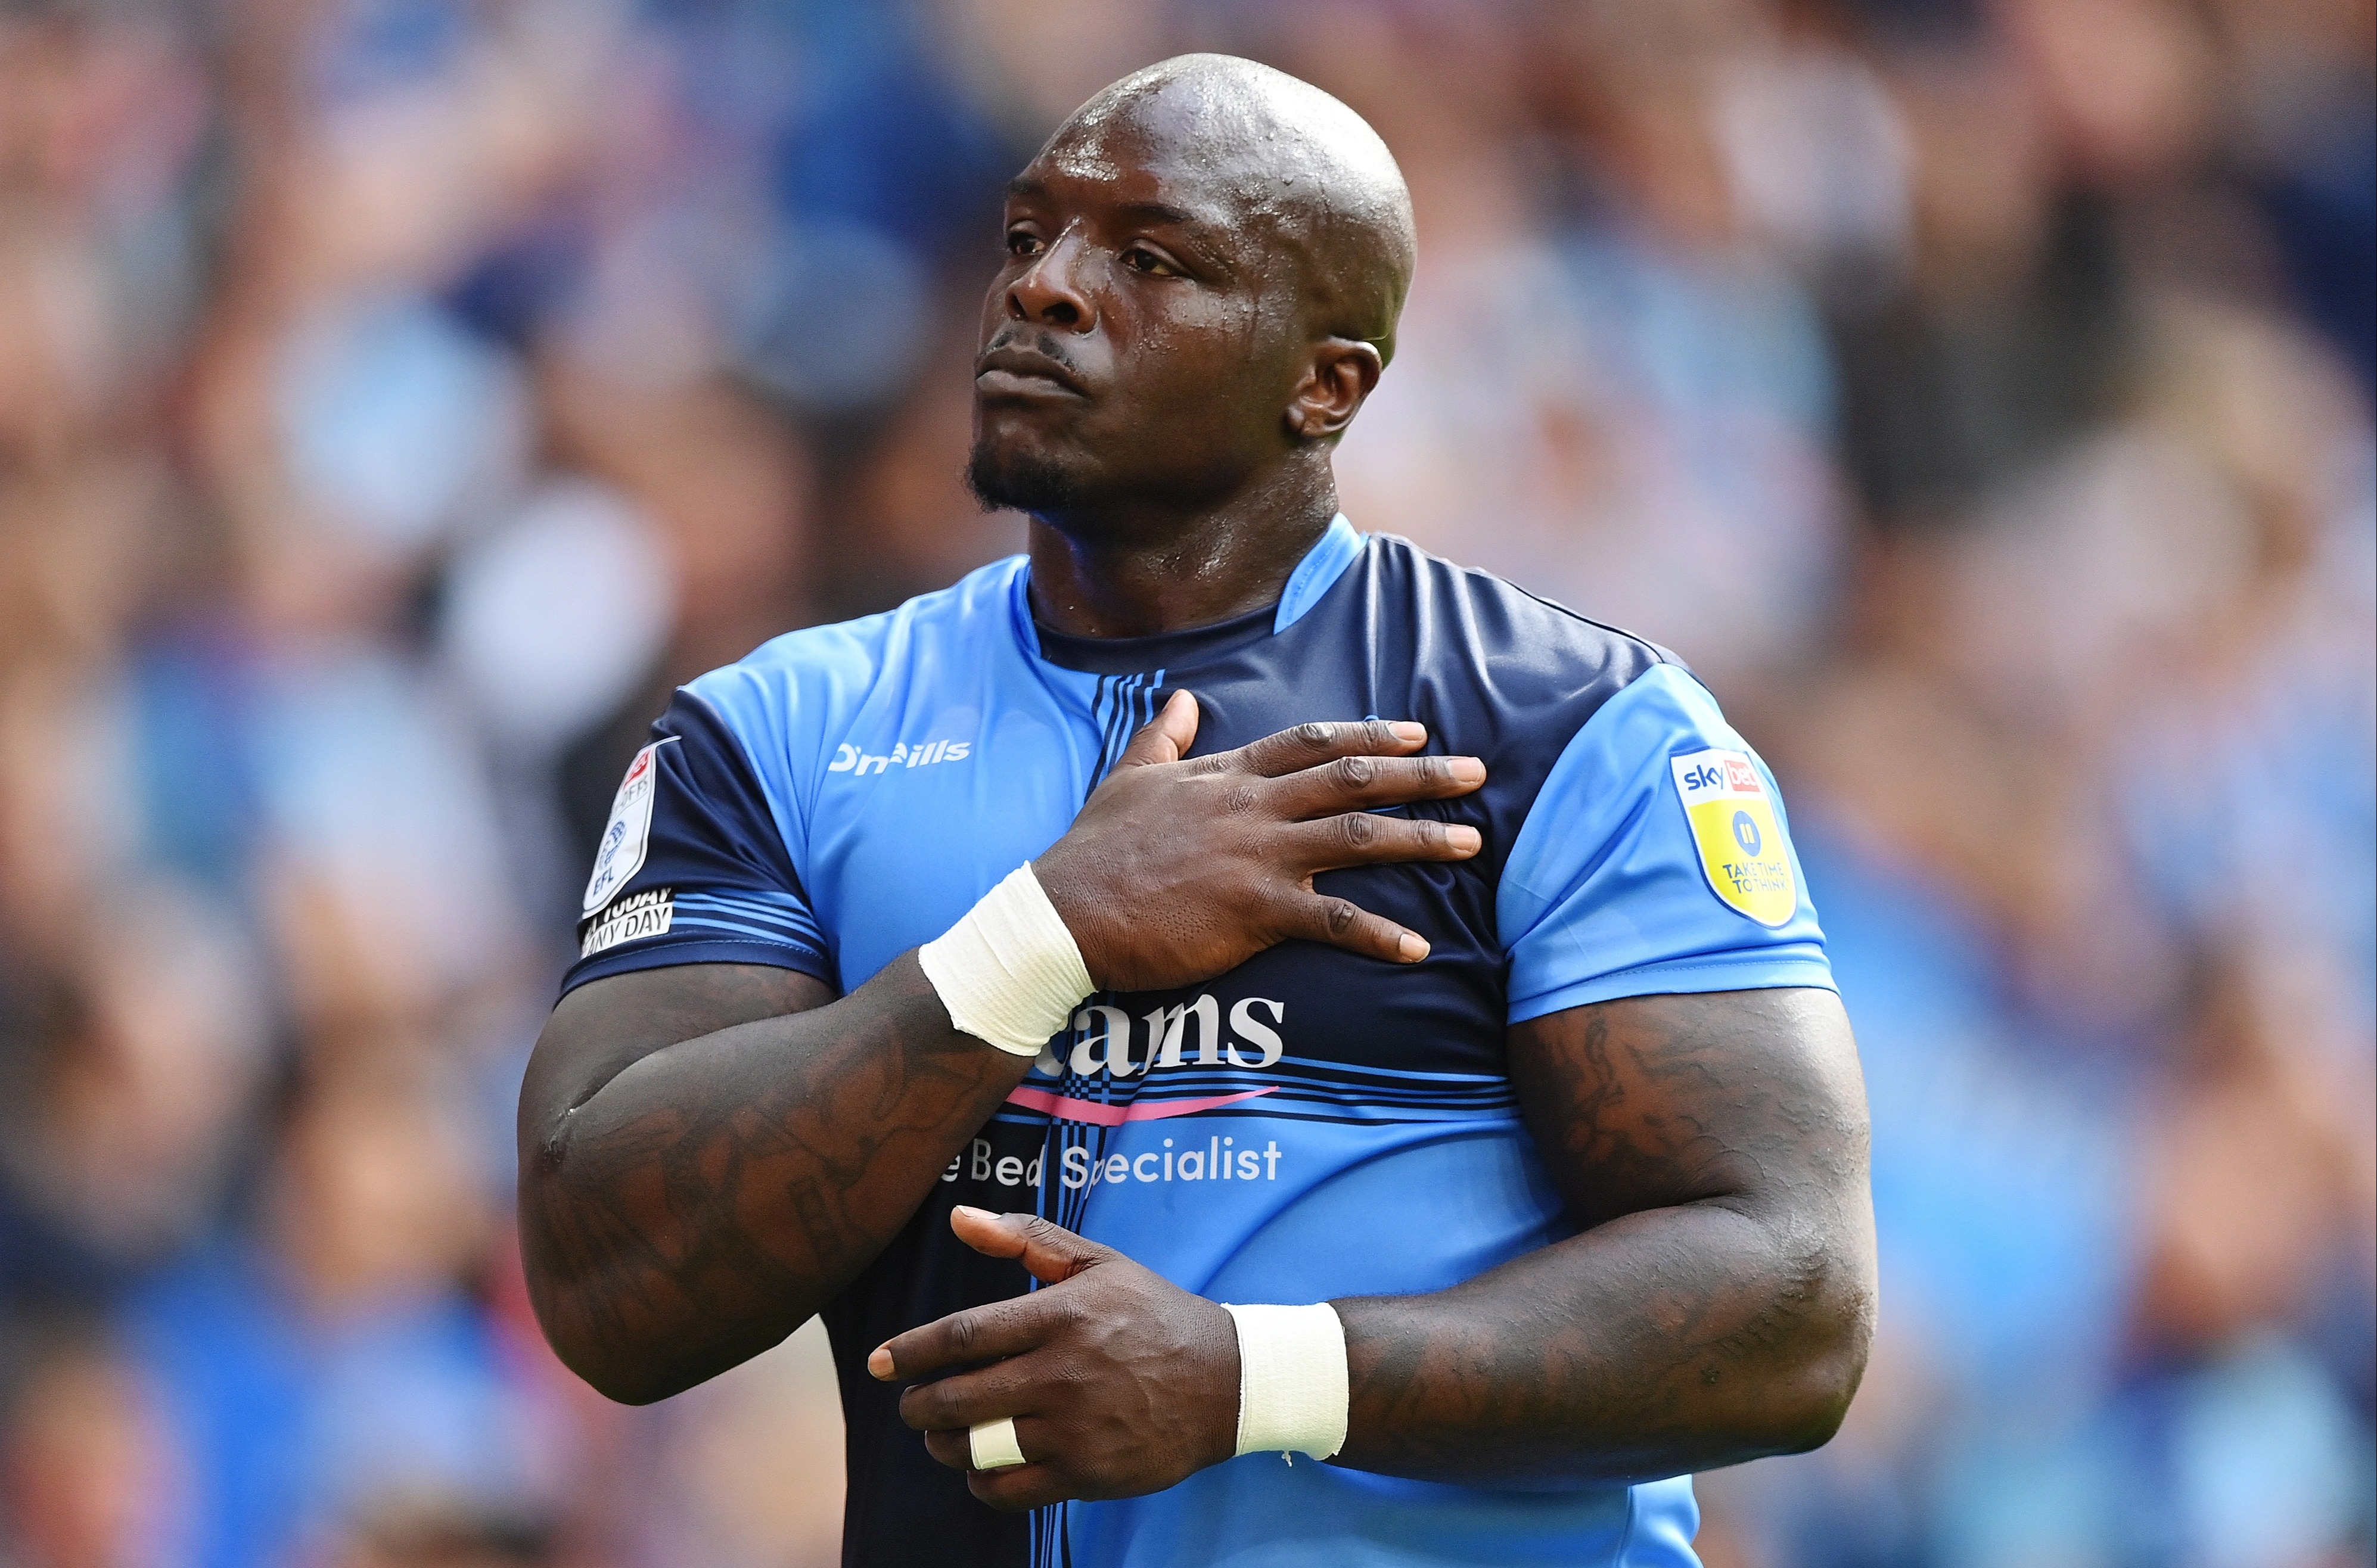 Adebayo Akinfenwa set for professional wrestling debut just five months after retiring from football | The Irish Sun